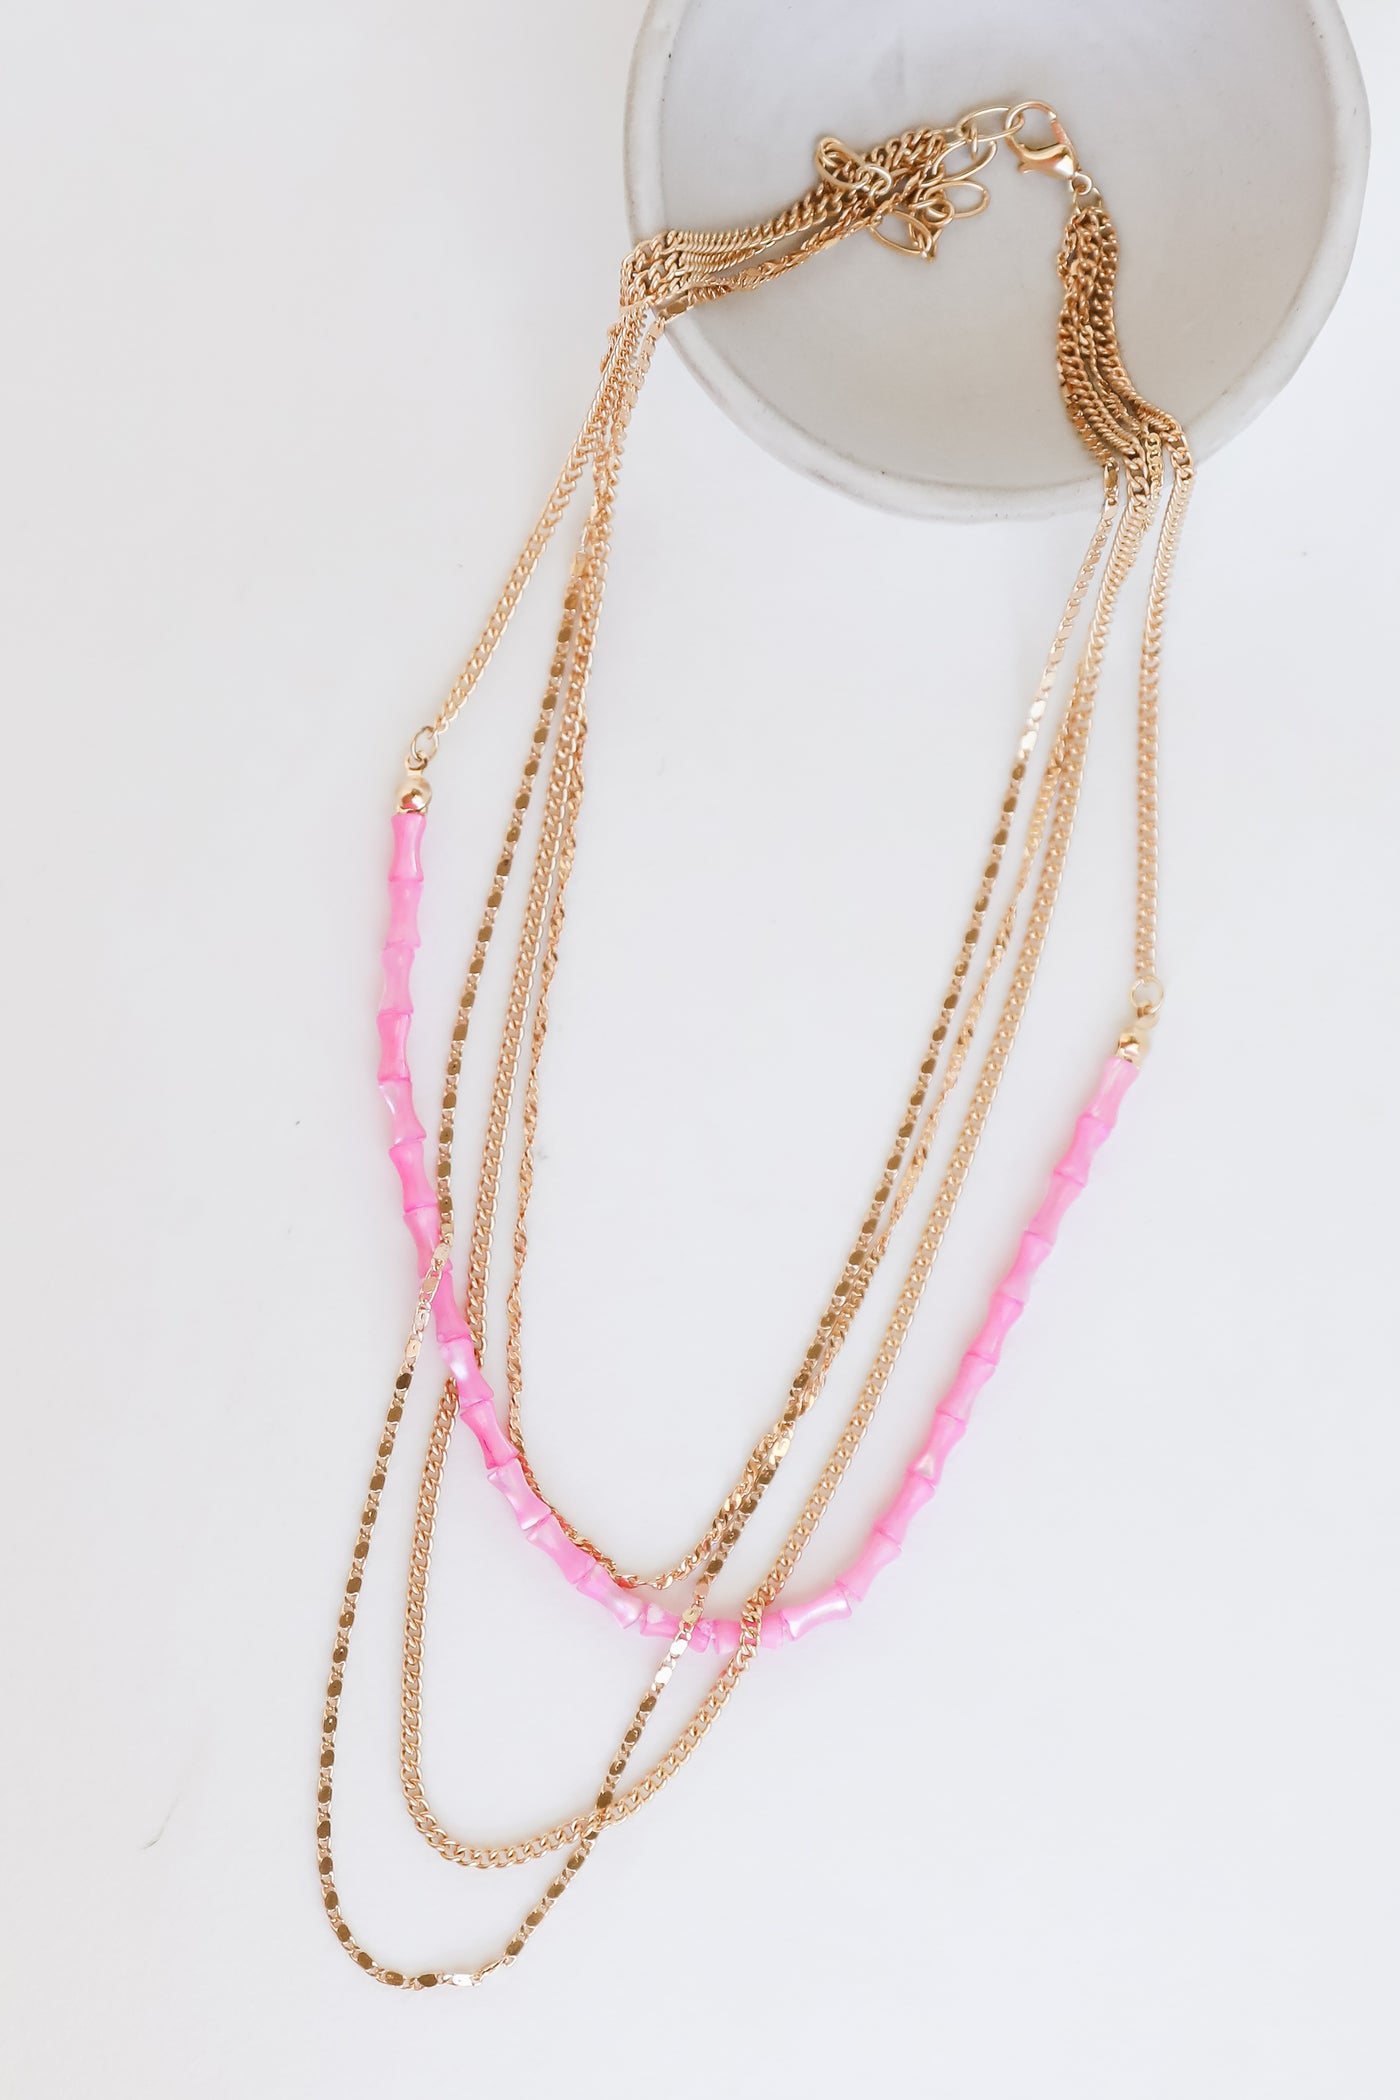 Gold Beaded Layered Chain Necklace flat lay